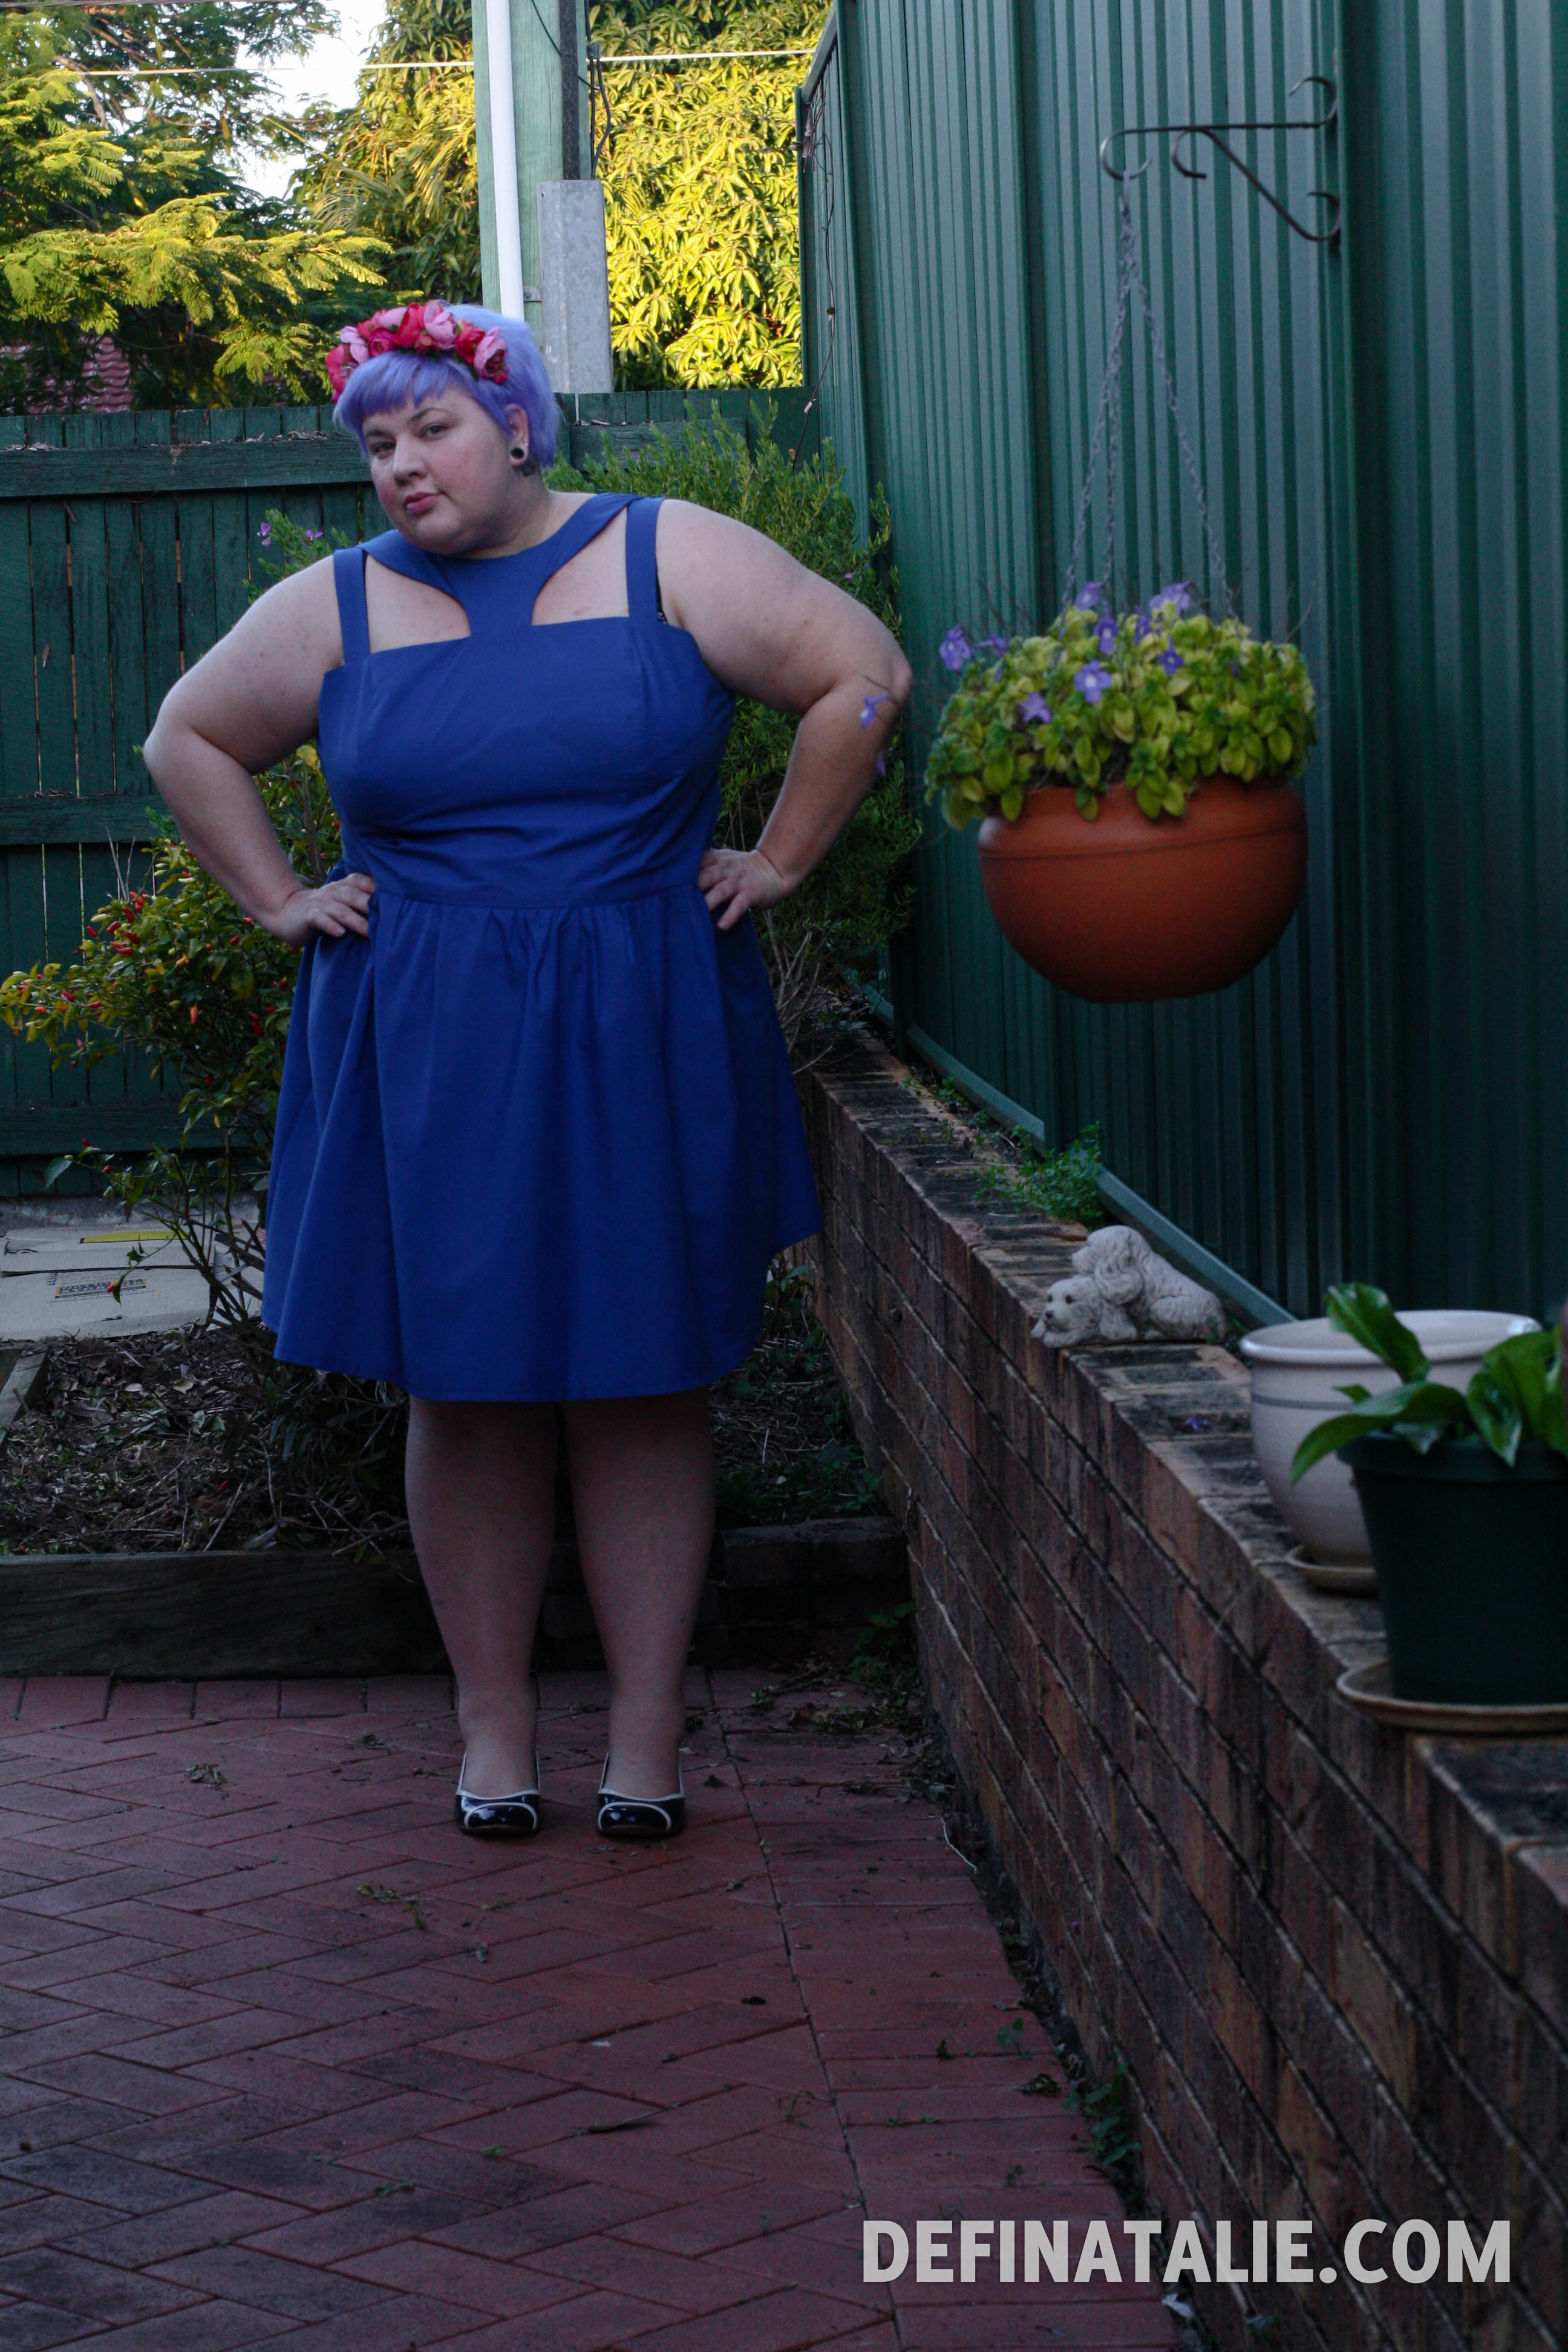 T-bar dress, from Tumblr to my body.